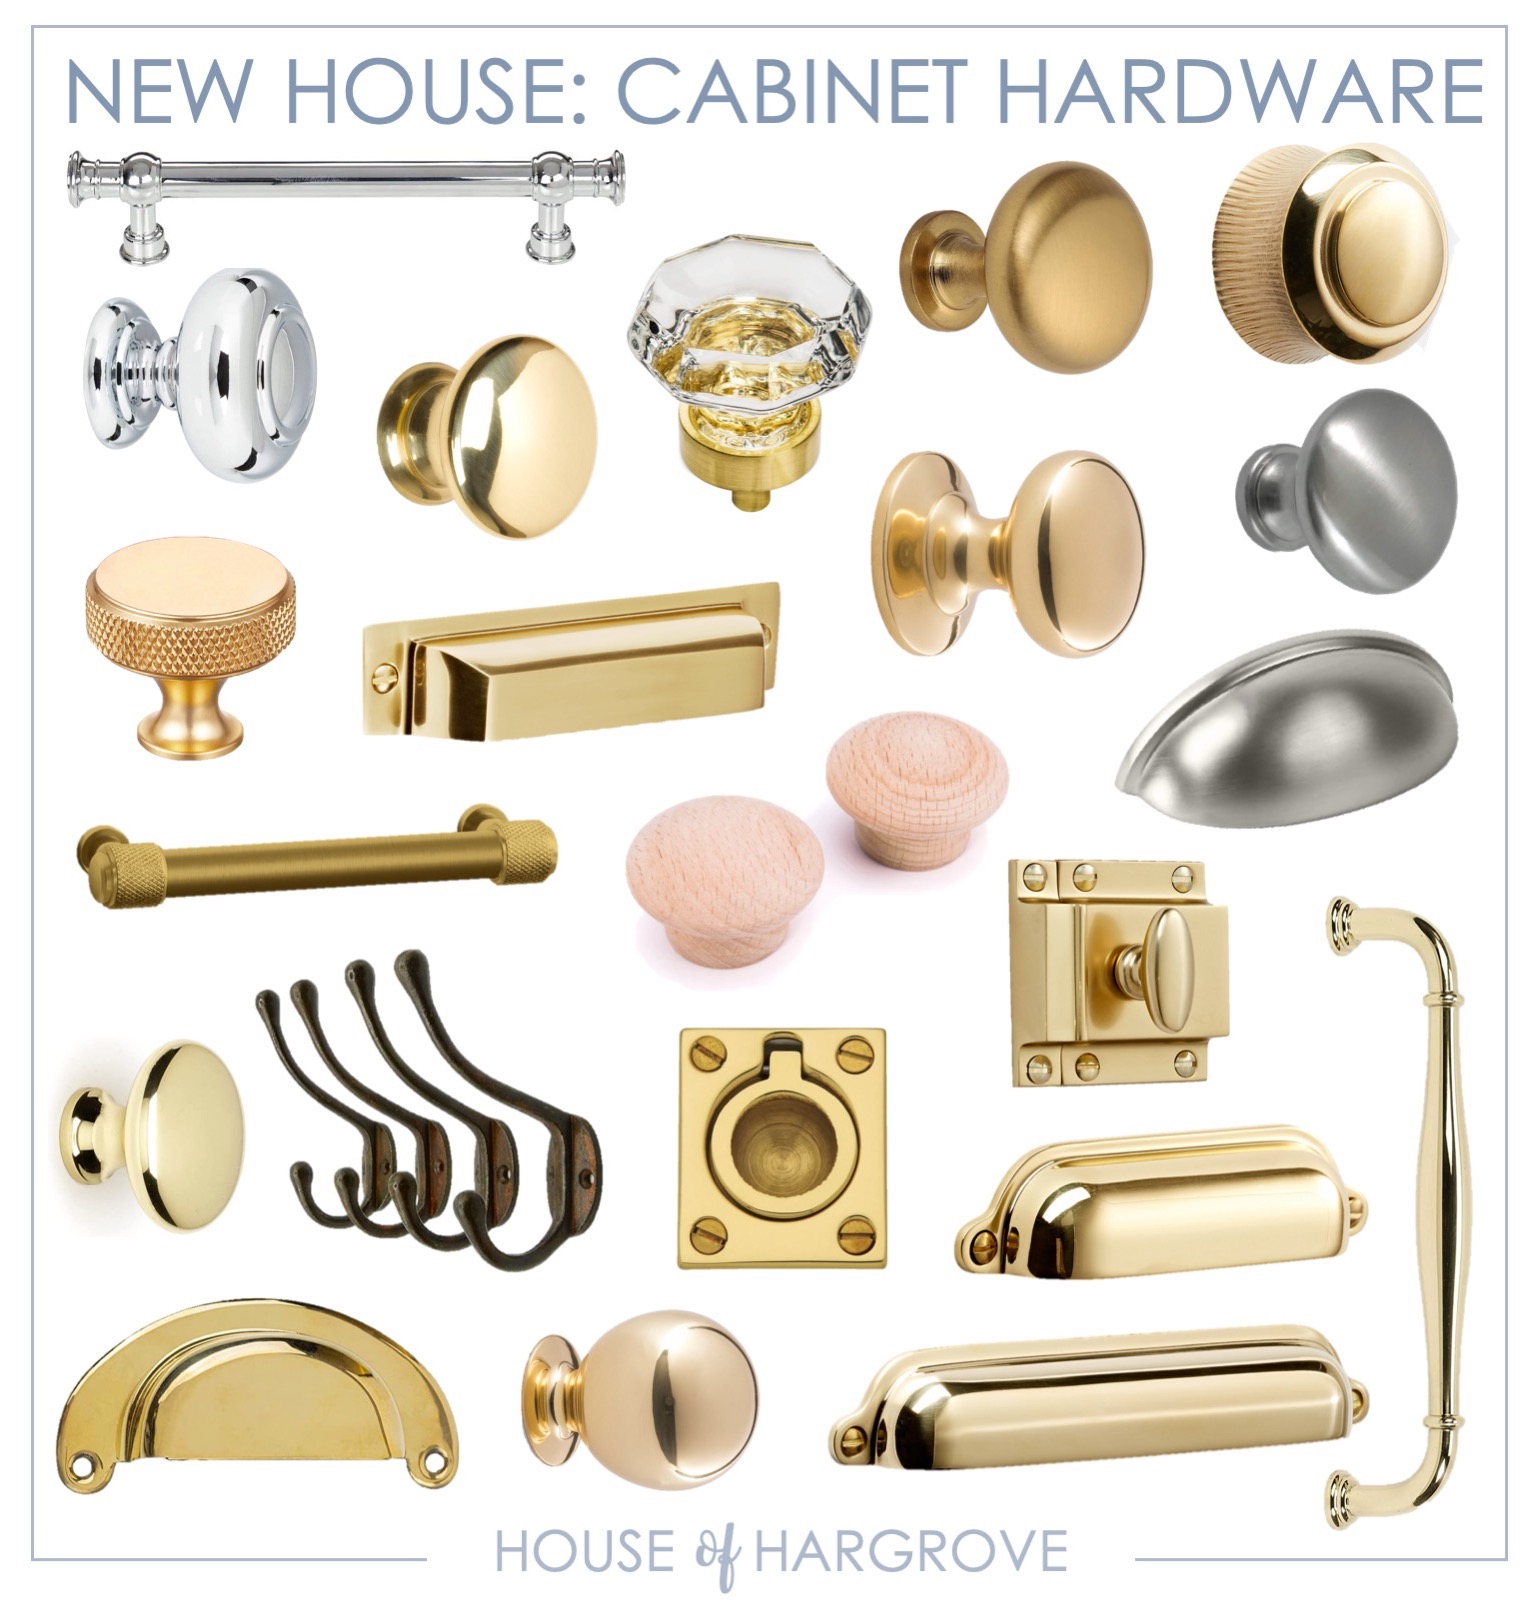 NEW HOUSE: HARDWARE- Cabinet knobs & pulls - House of Hargrove